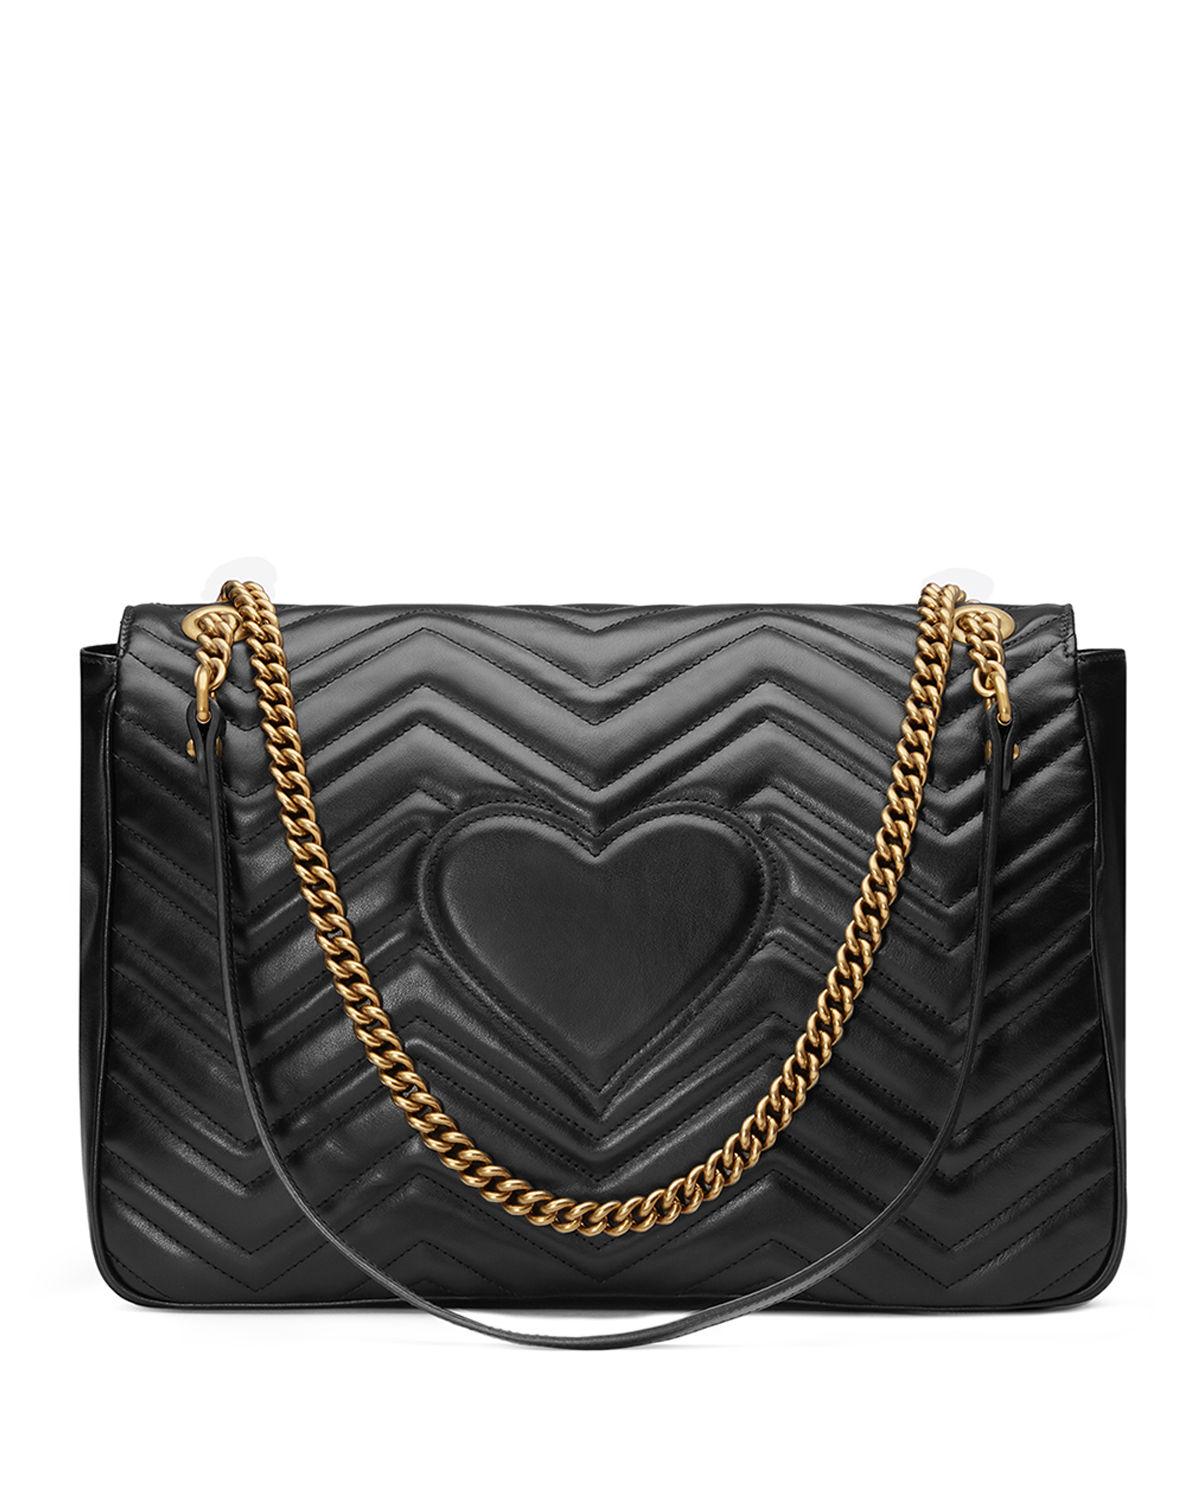 Gucci GG Marmont Large Chevron Quilted Leather Shoulder Bag in Black - Lyst